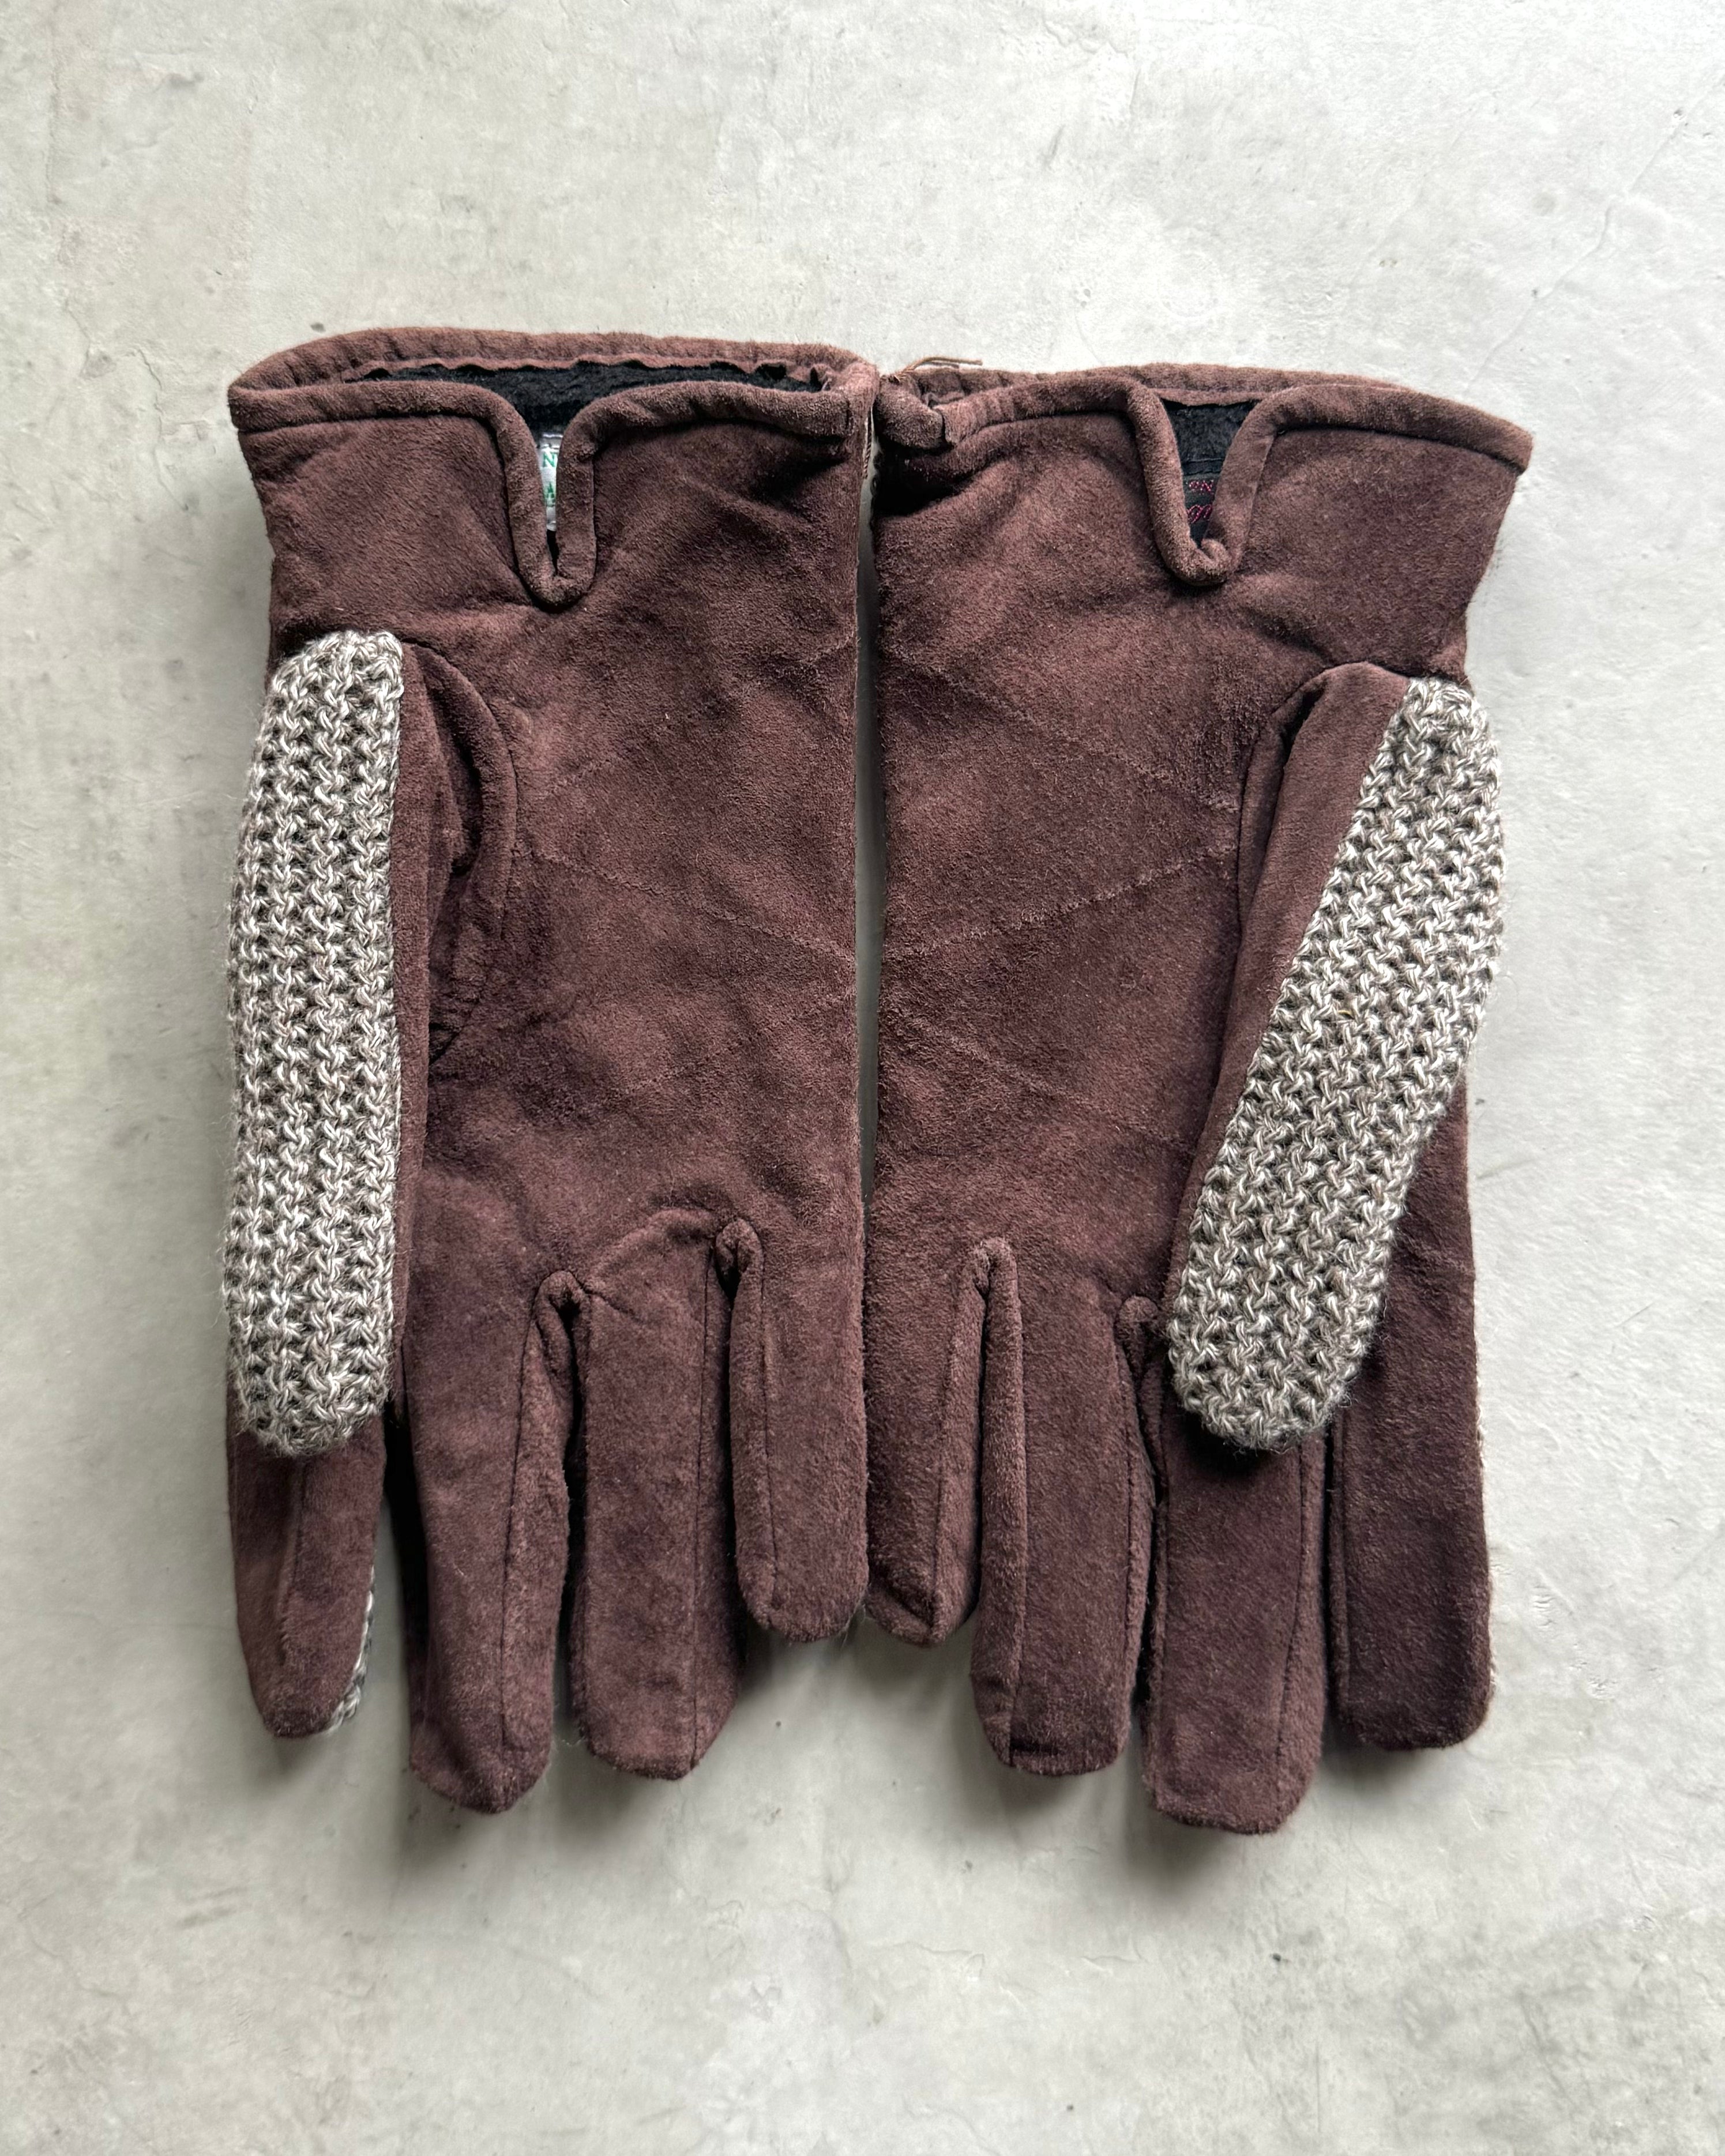 ANACHRONORM / Suede Knit Mix Glove by ISLAND KNIT WORKS - BROWN